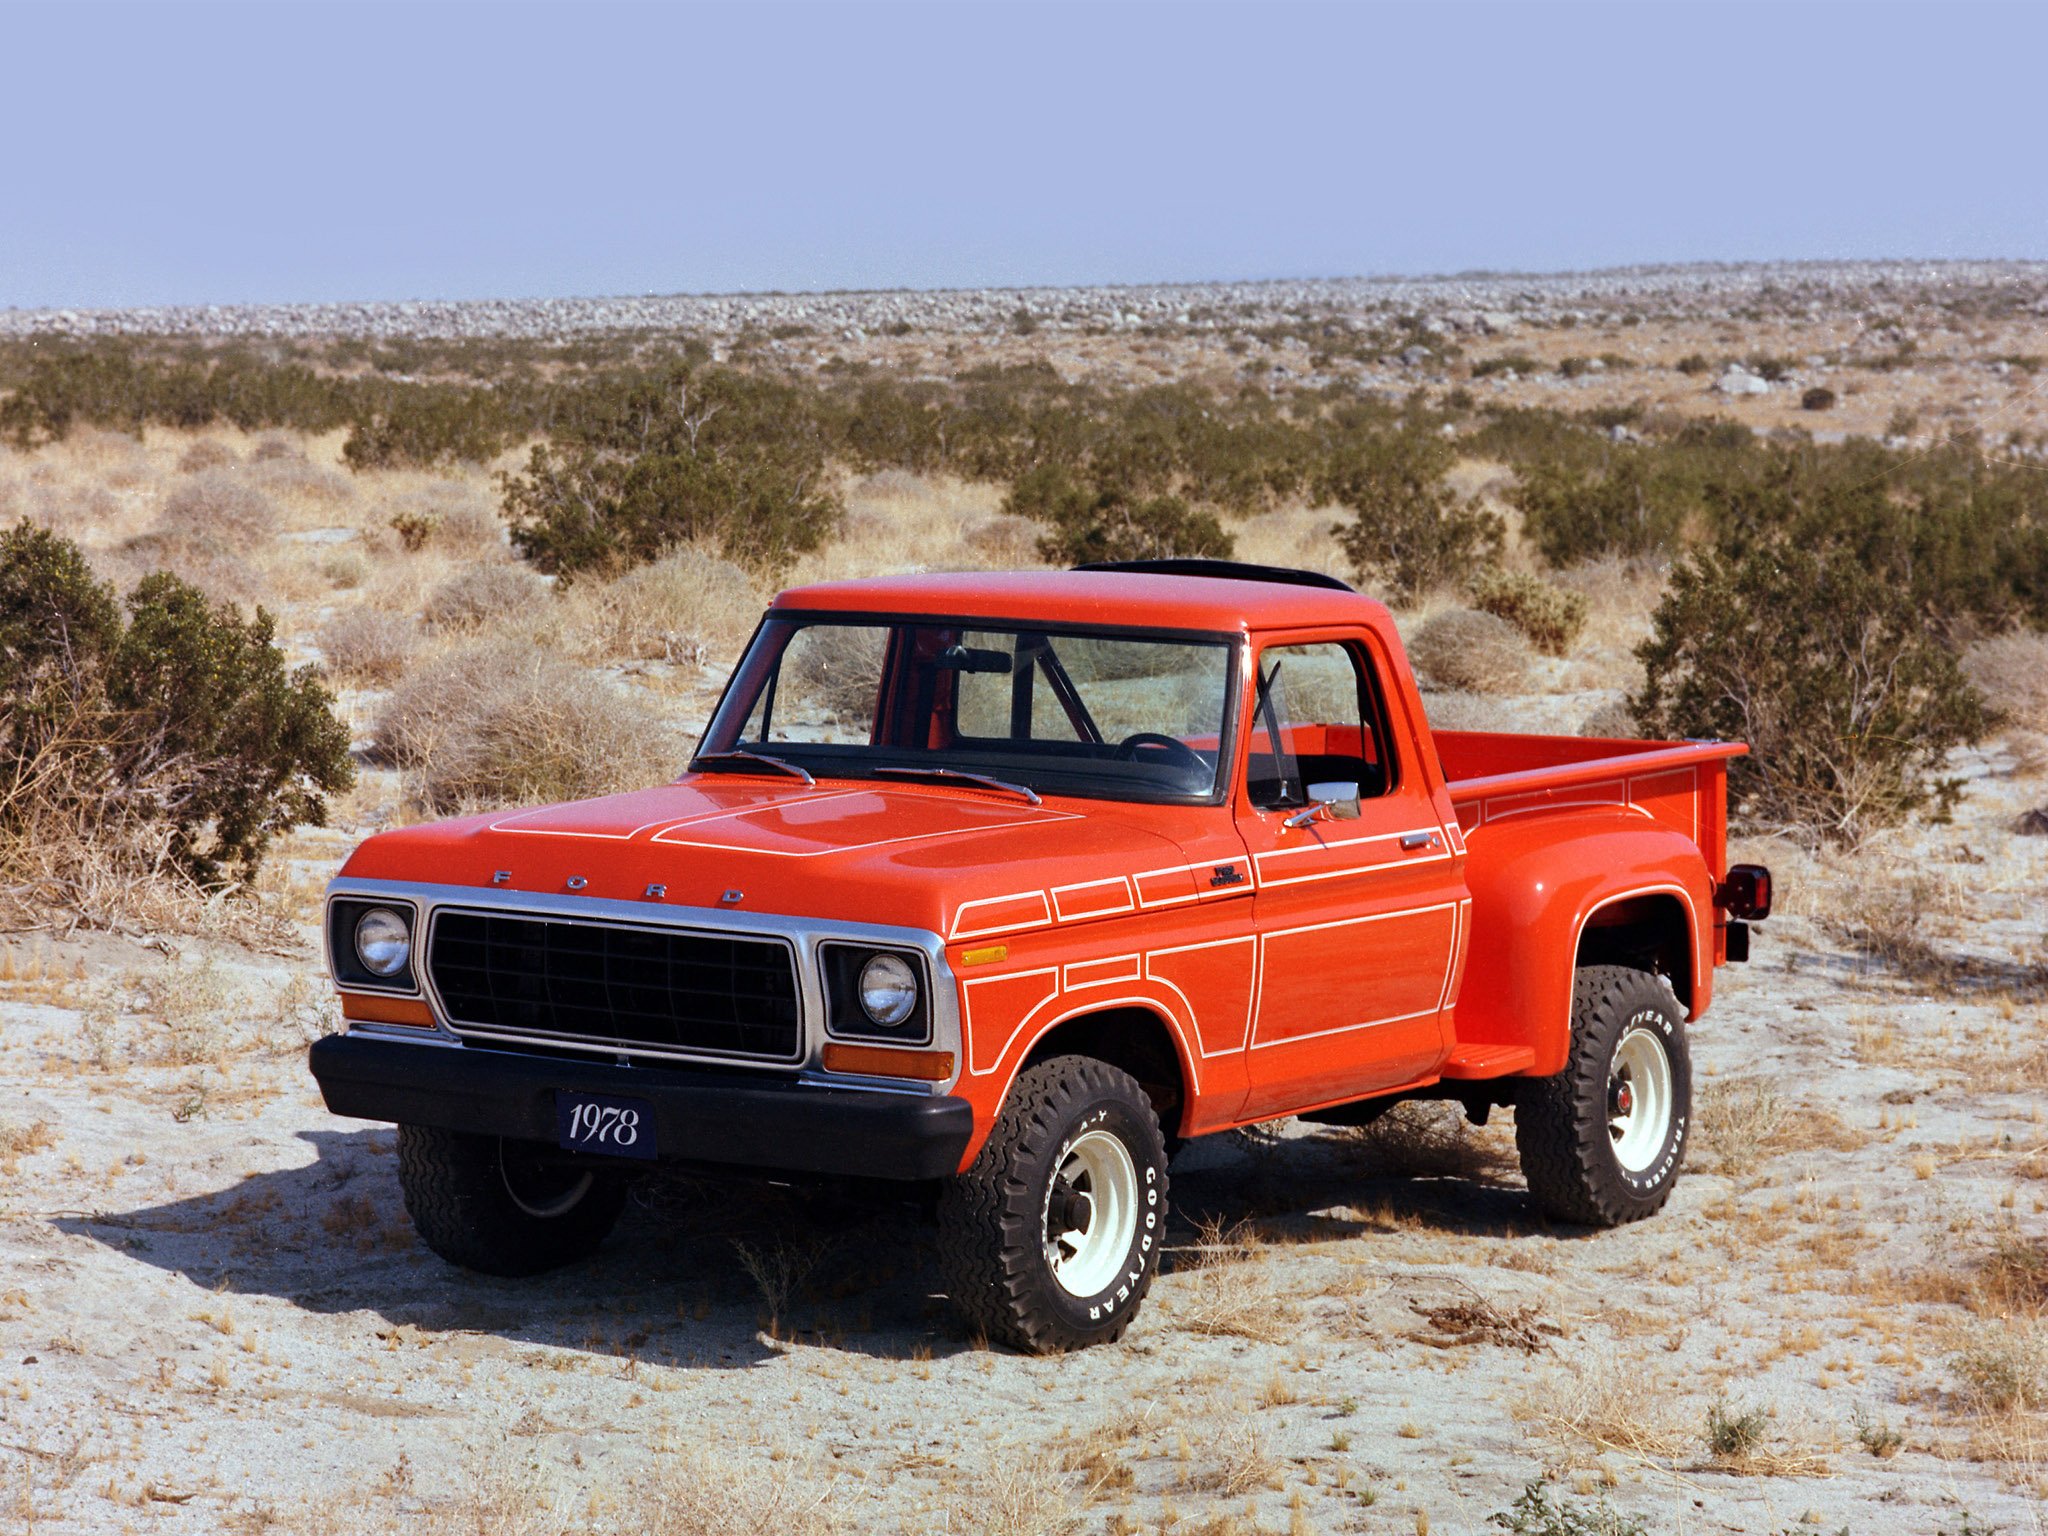 1978 Ford F 100 classic truck 4x4 wallpaper background